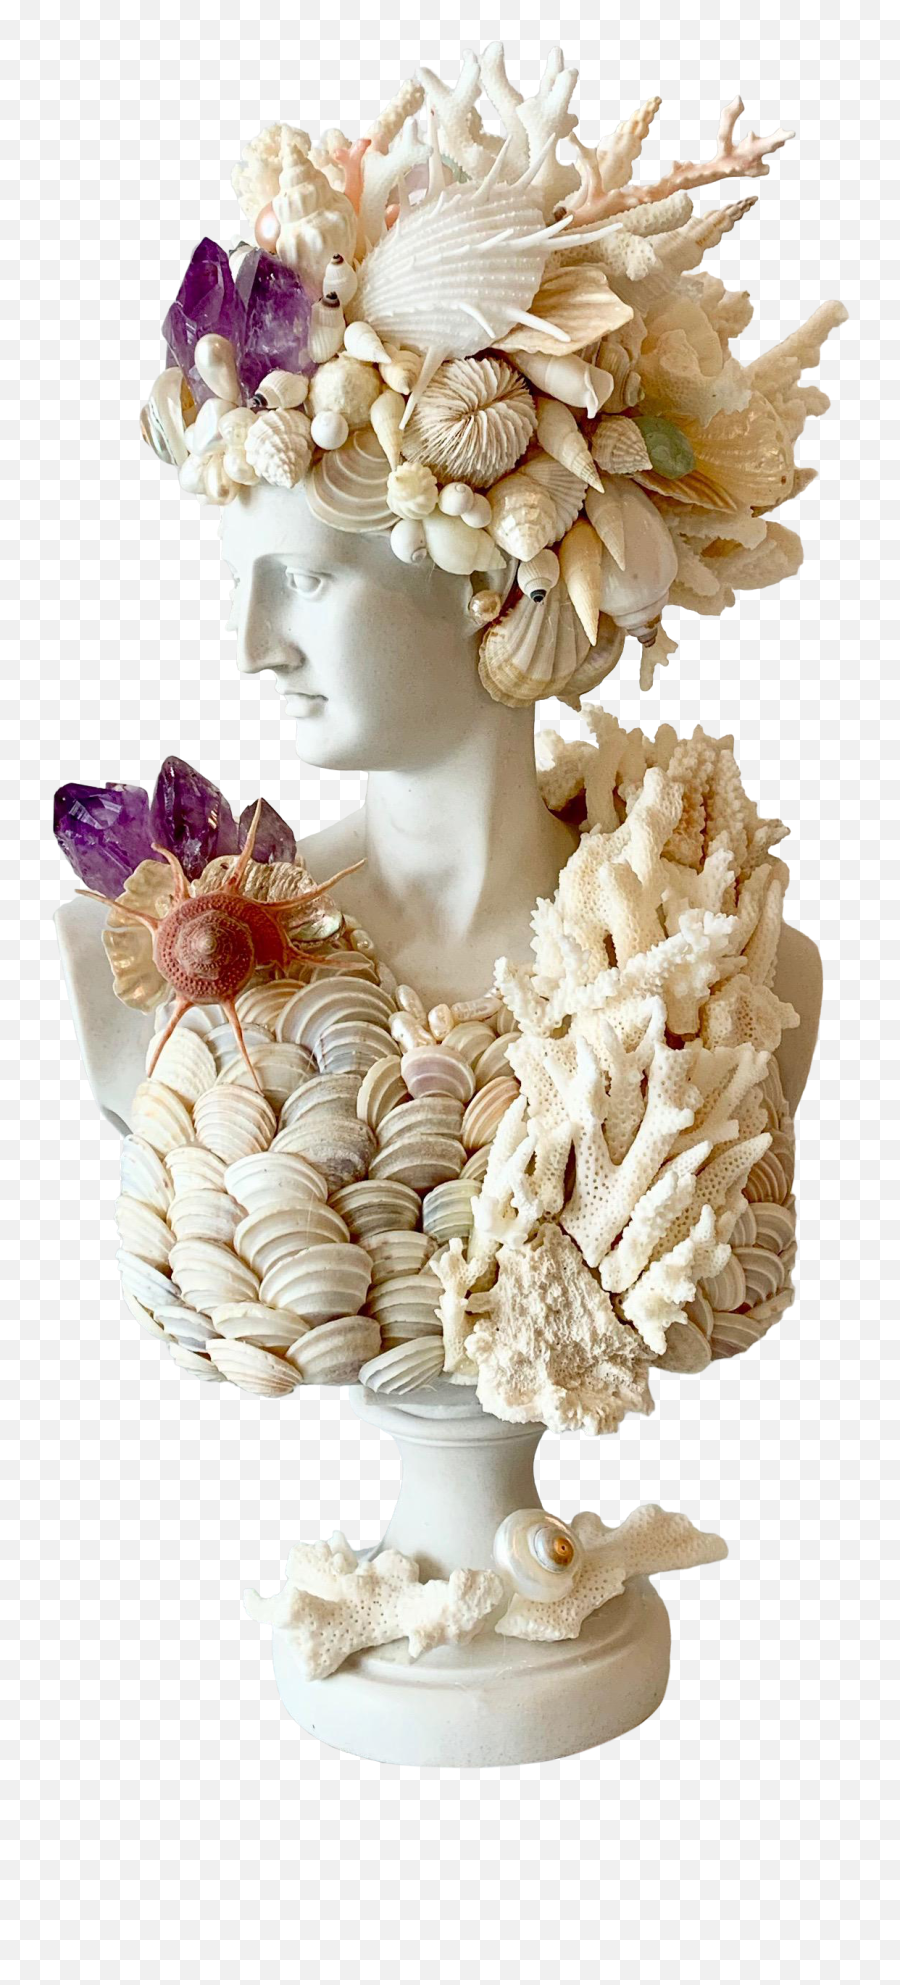 Greek Artemis In Shells Corals And Amethyst Sculpture On - Greek Sculpture Sea Shells Emoji,Style Of Greek Sculpture Emotion And Naturalistic Depictions Of People